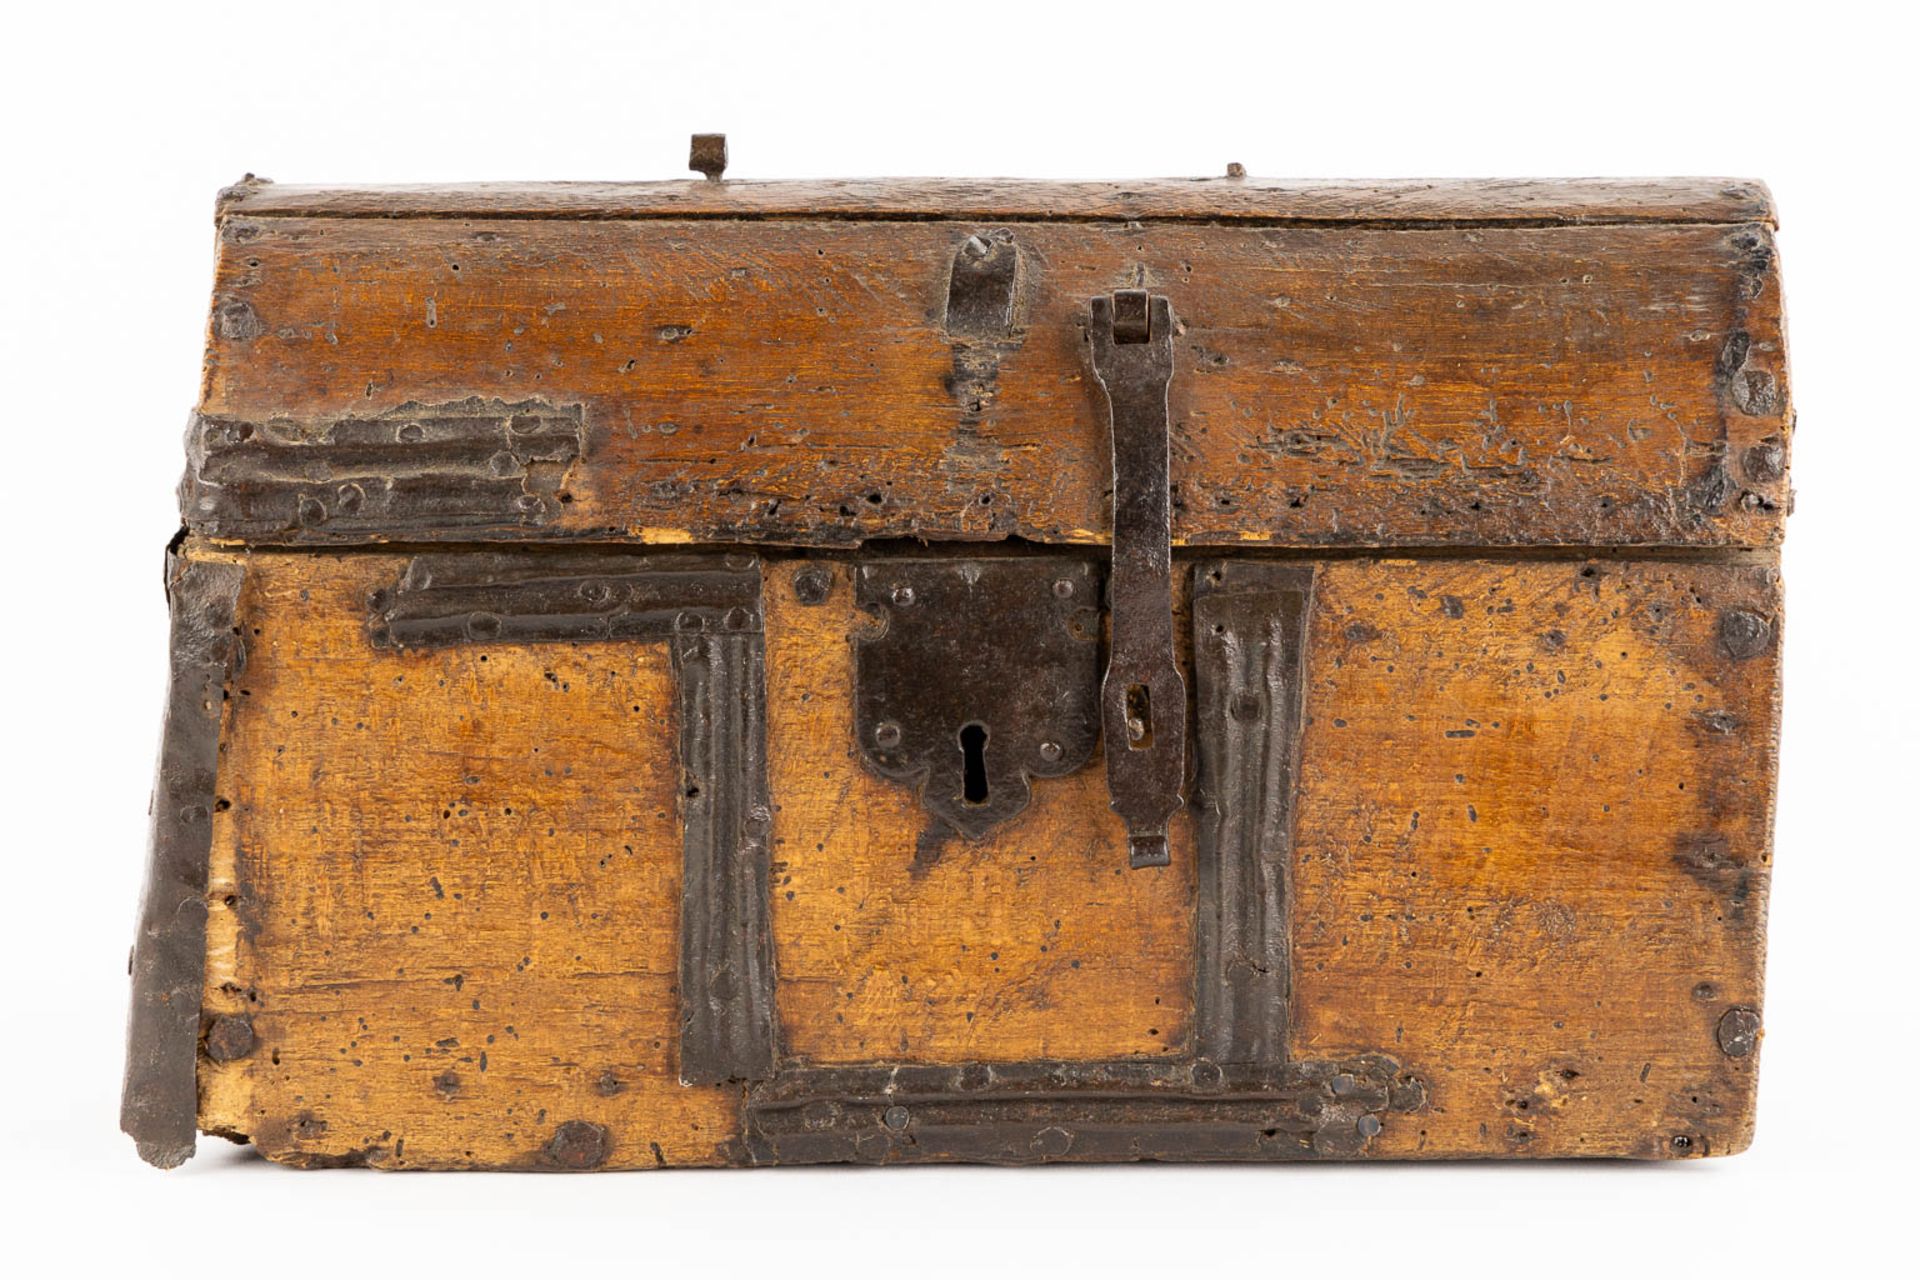 An antique money box or storage chest, wood and wrought iron, 16th/17th C. (L:20 x W:36 x H:22 cm) - Image 3 of 14